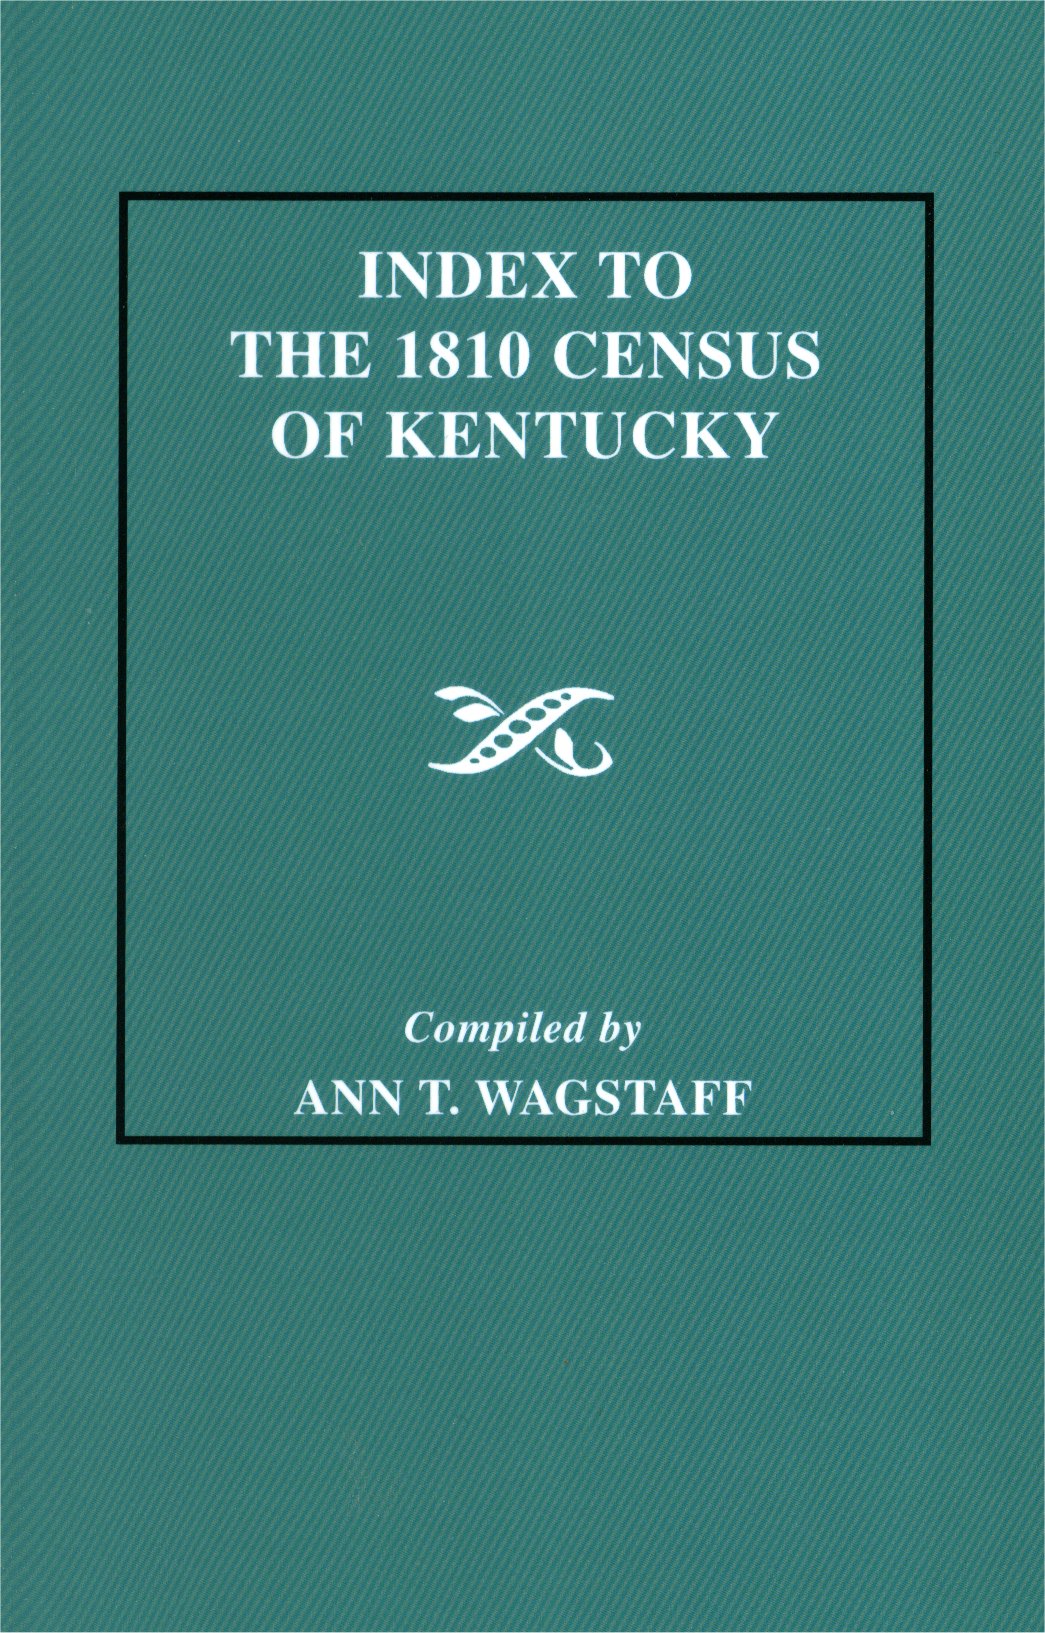 Index to the 1810 Census of Kentucky